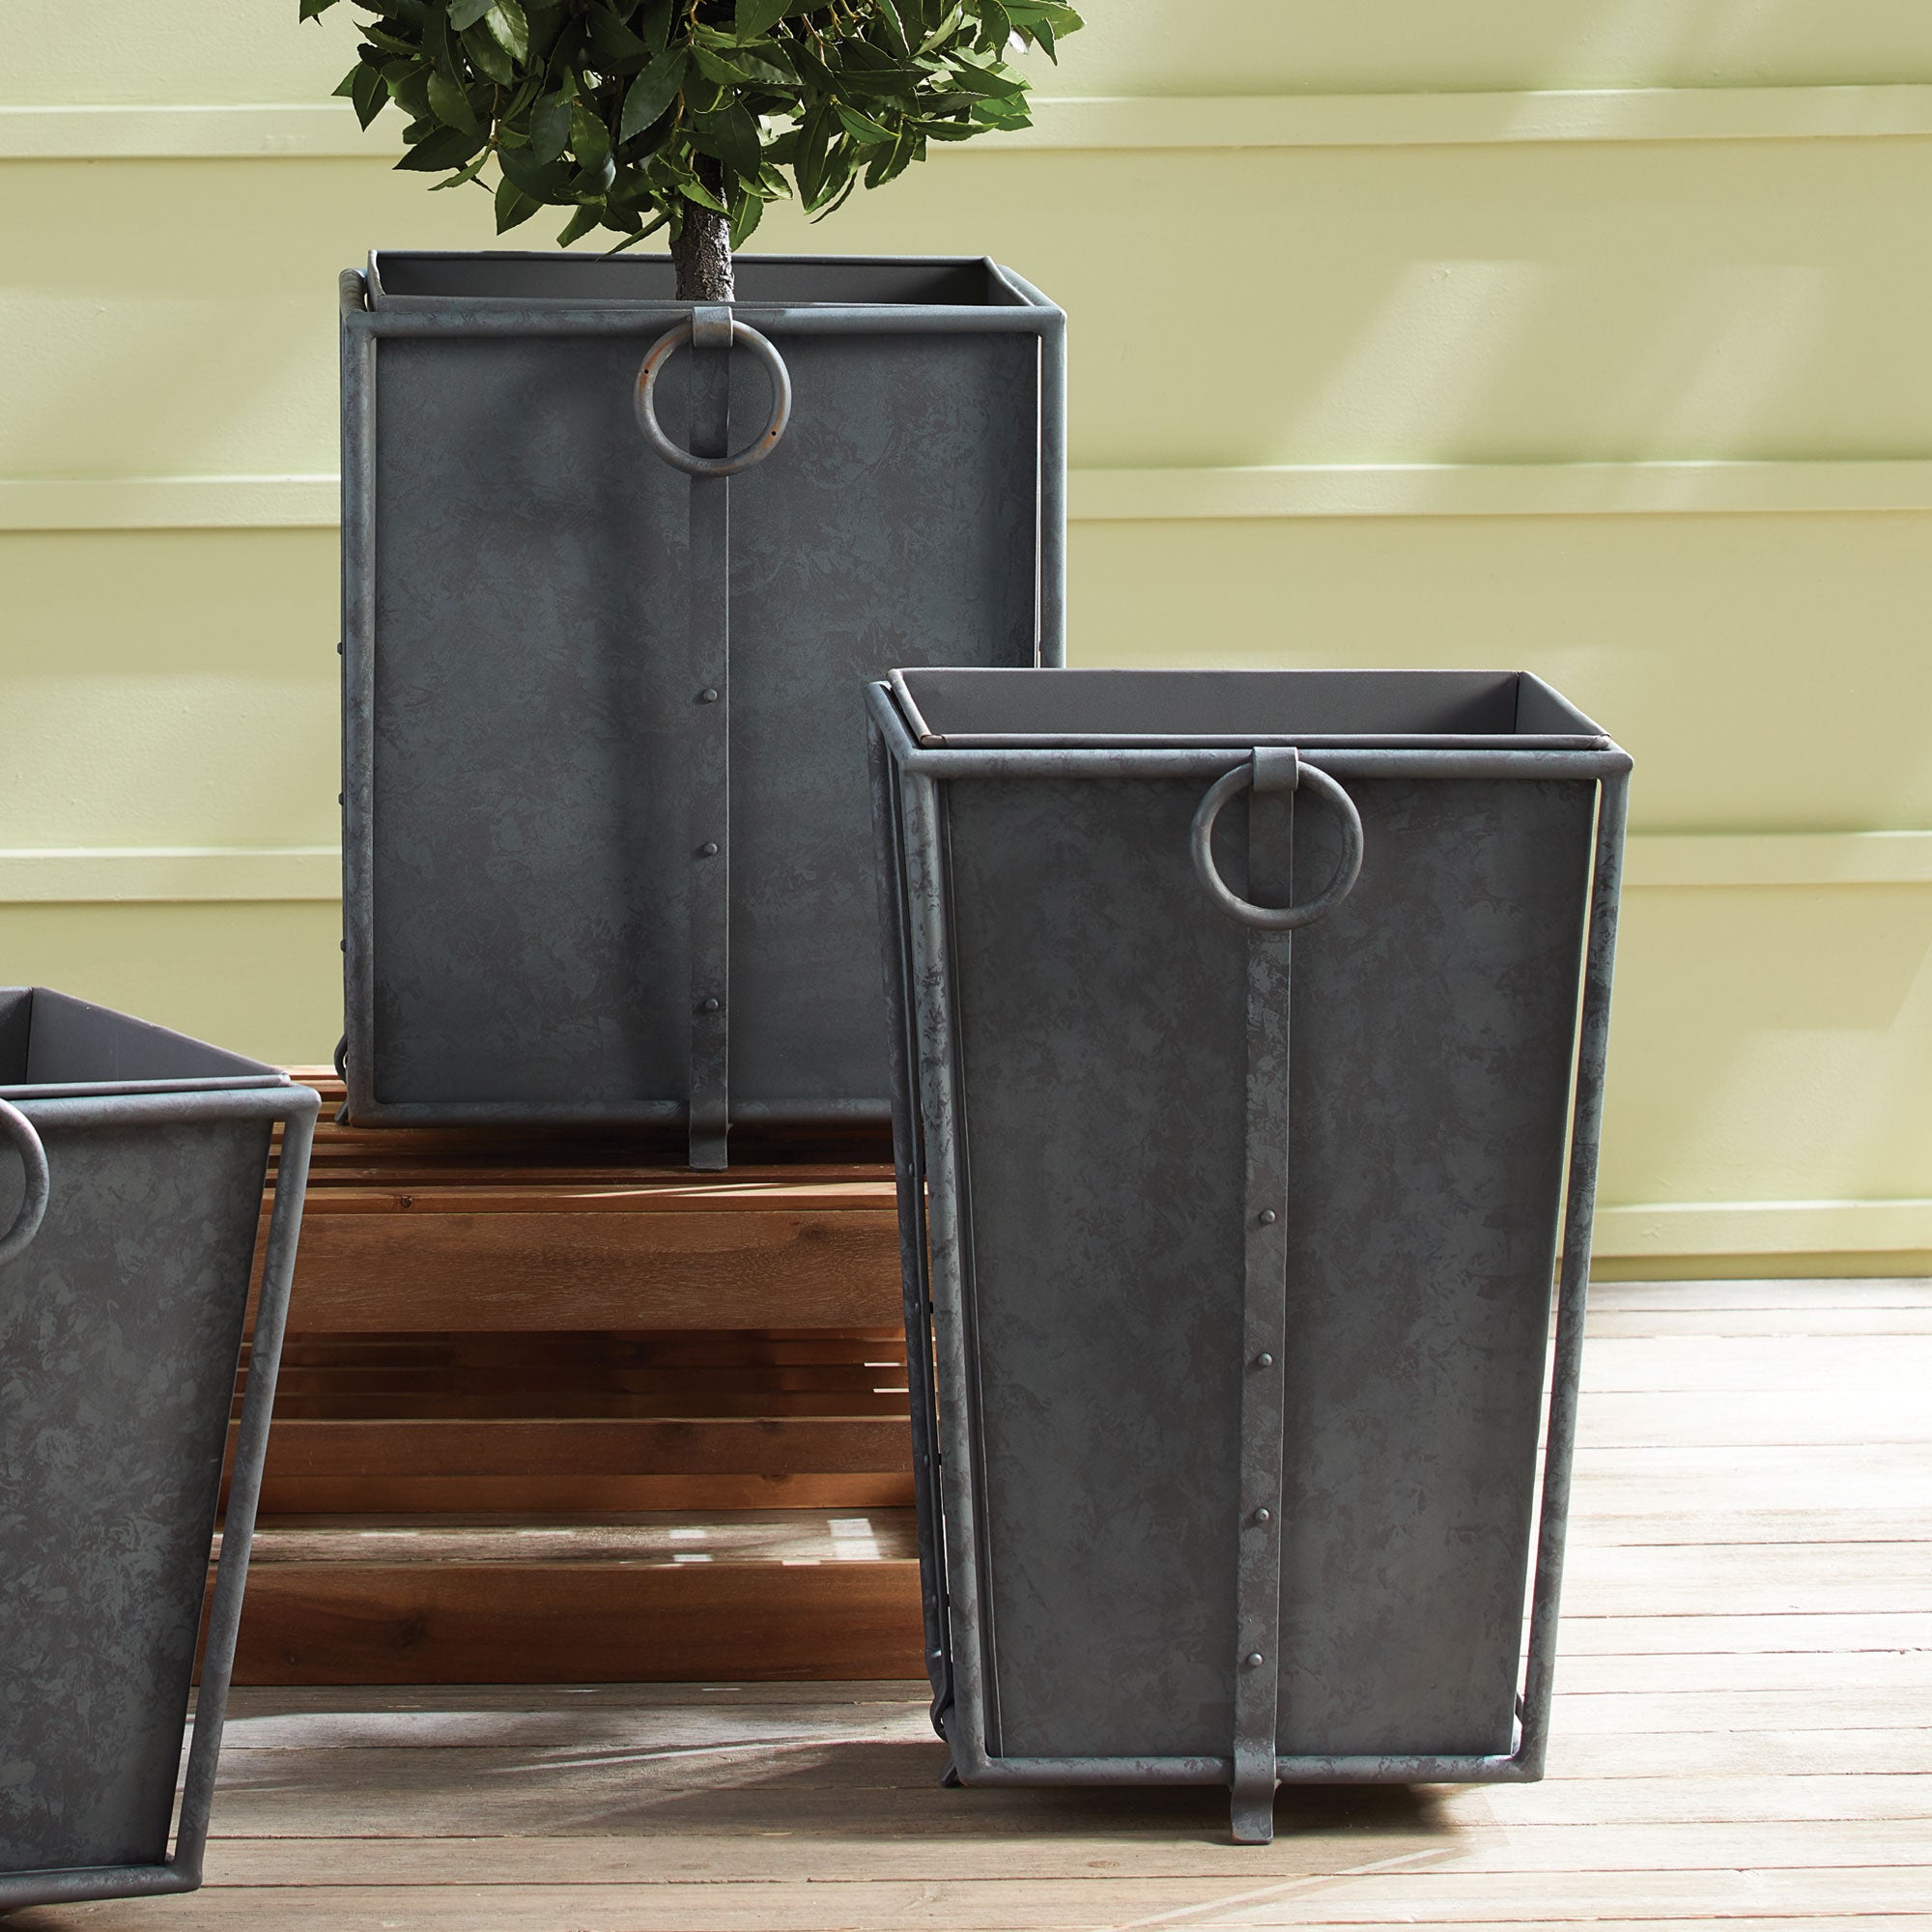 With metal liners that easily slide out, the Callahan Tapered Planter is as practical as it is handsome. The rounded handles and traditional design make it an outdoor classic. Amethyst Home provides interior design, new construction, custom furniture, and area rugs in the Boston metro area.